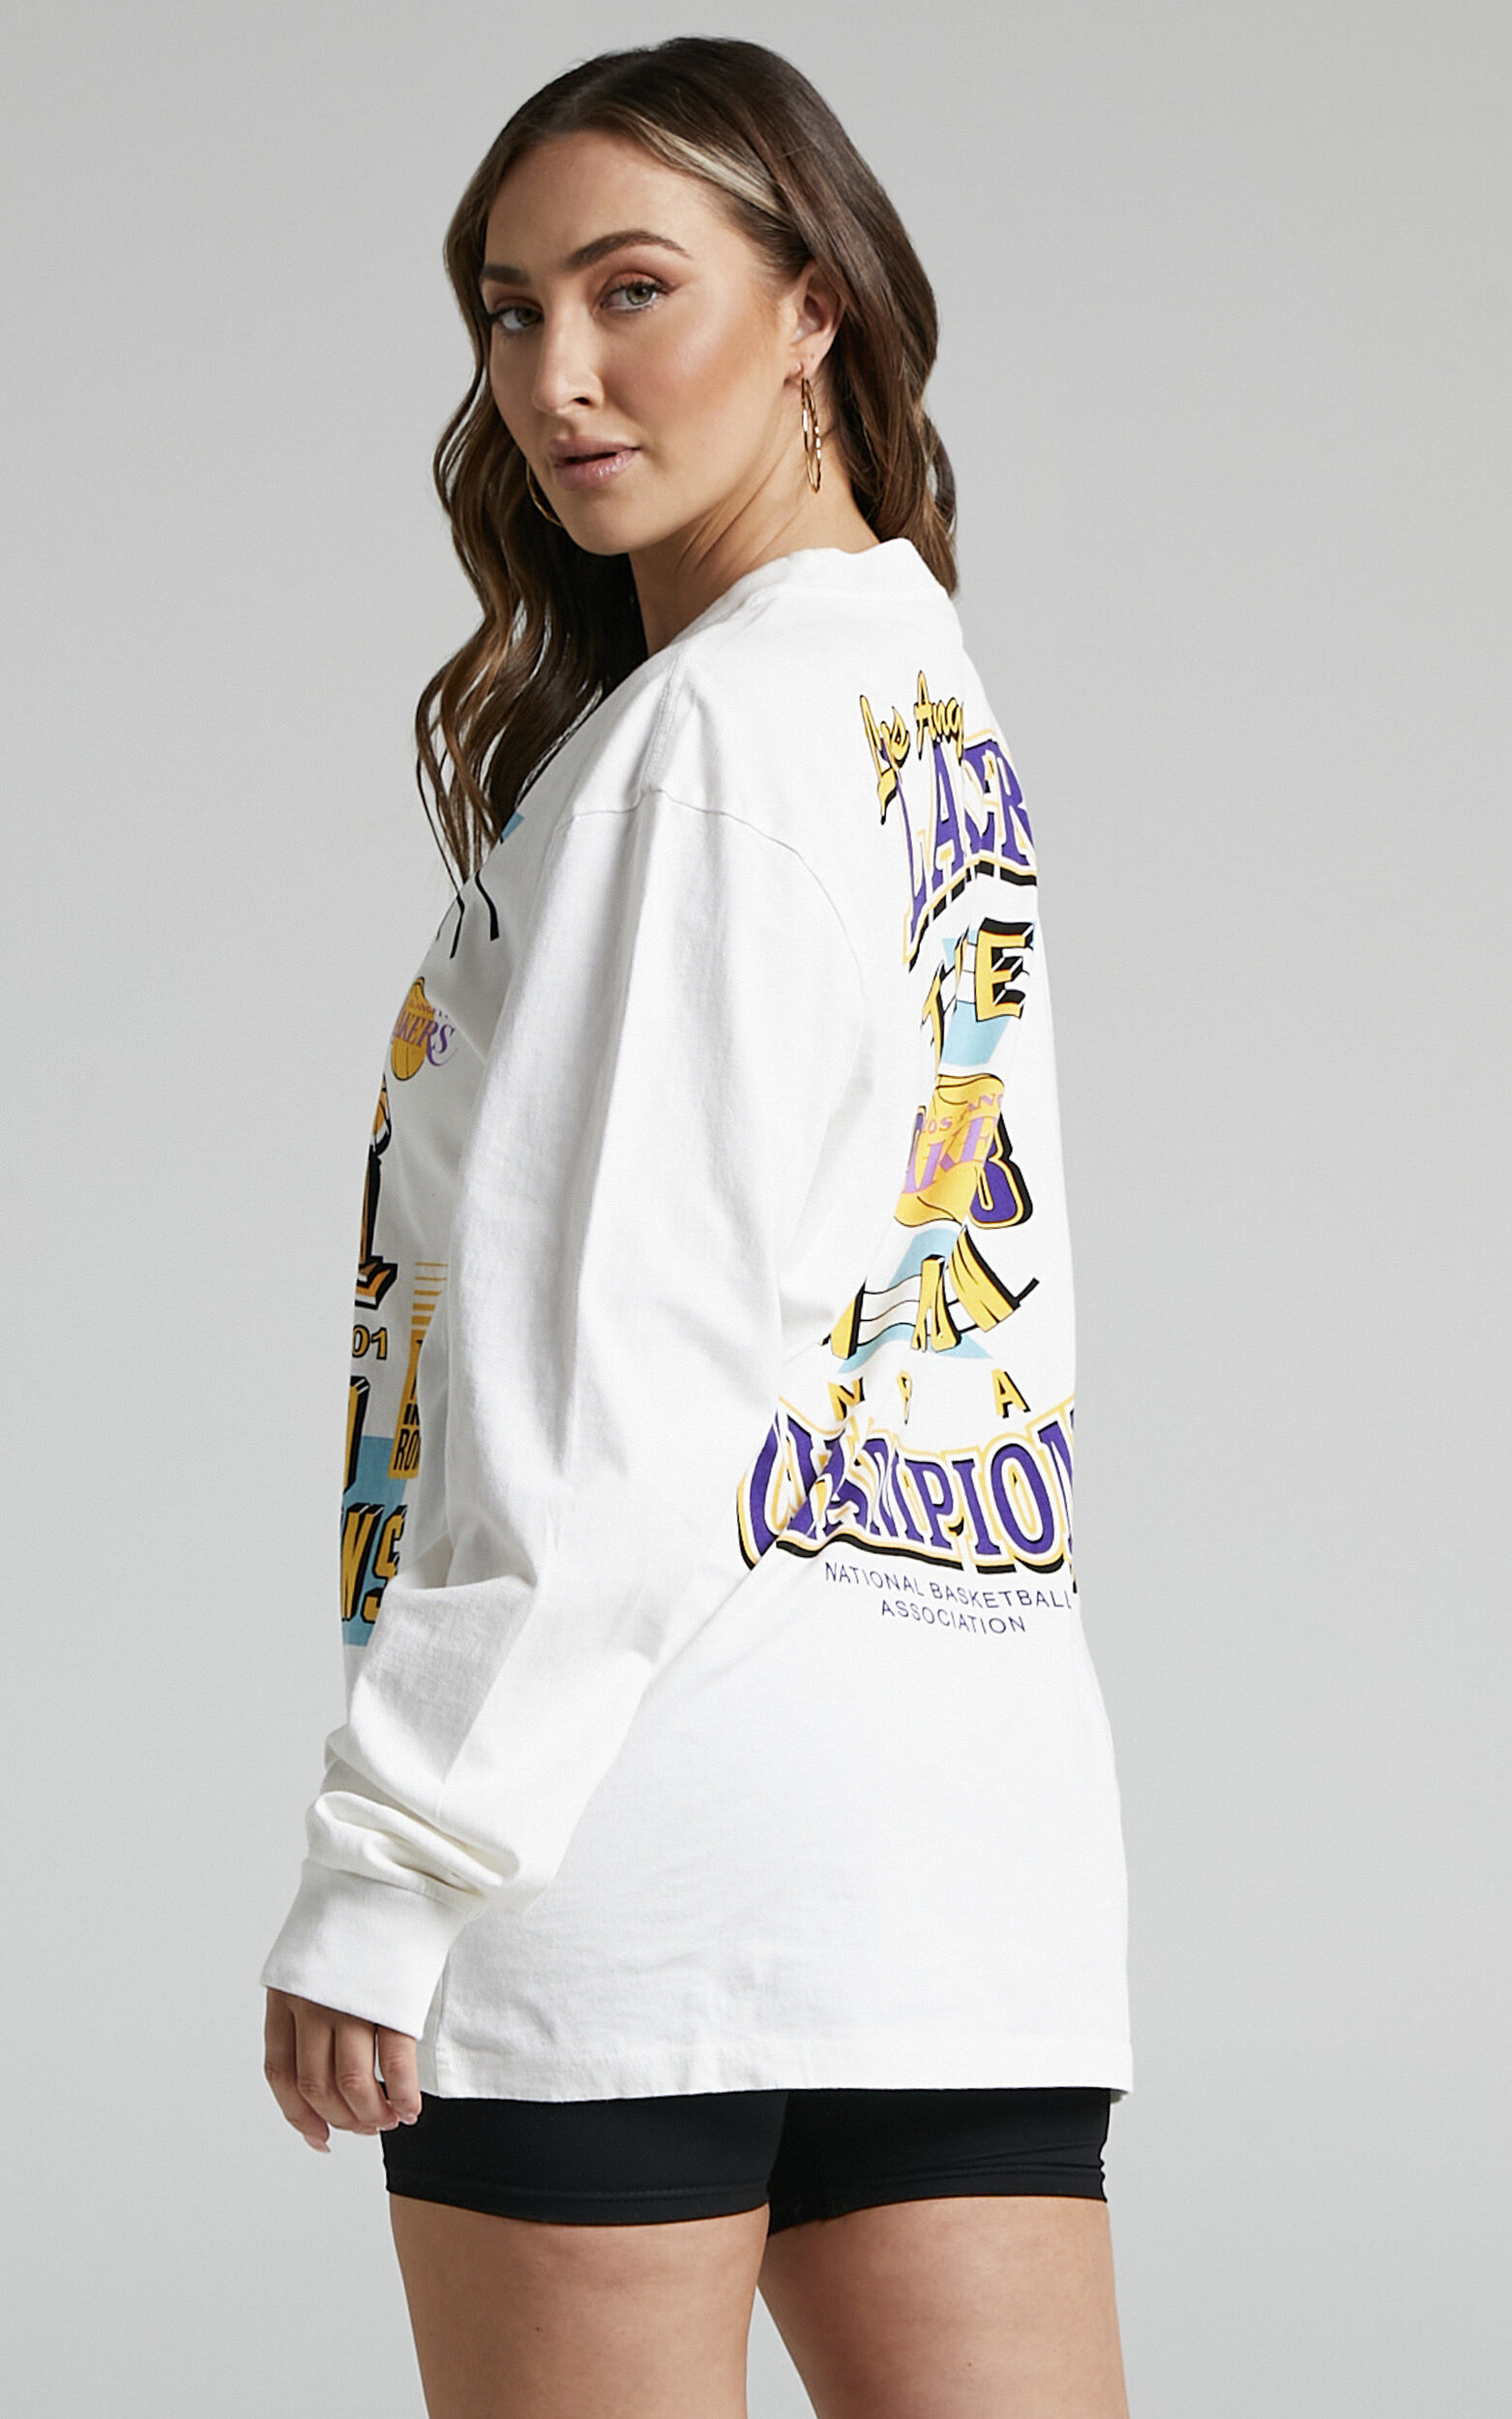 Lakers 3 in a Row Vintage White Long Sleeve Tee